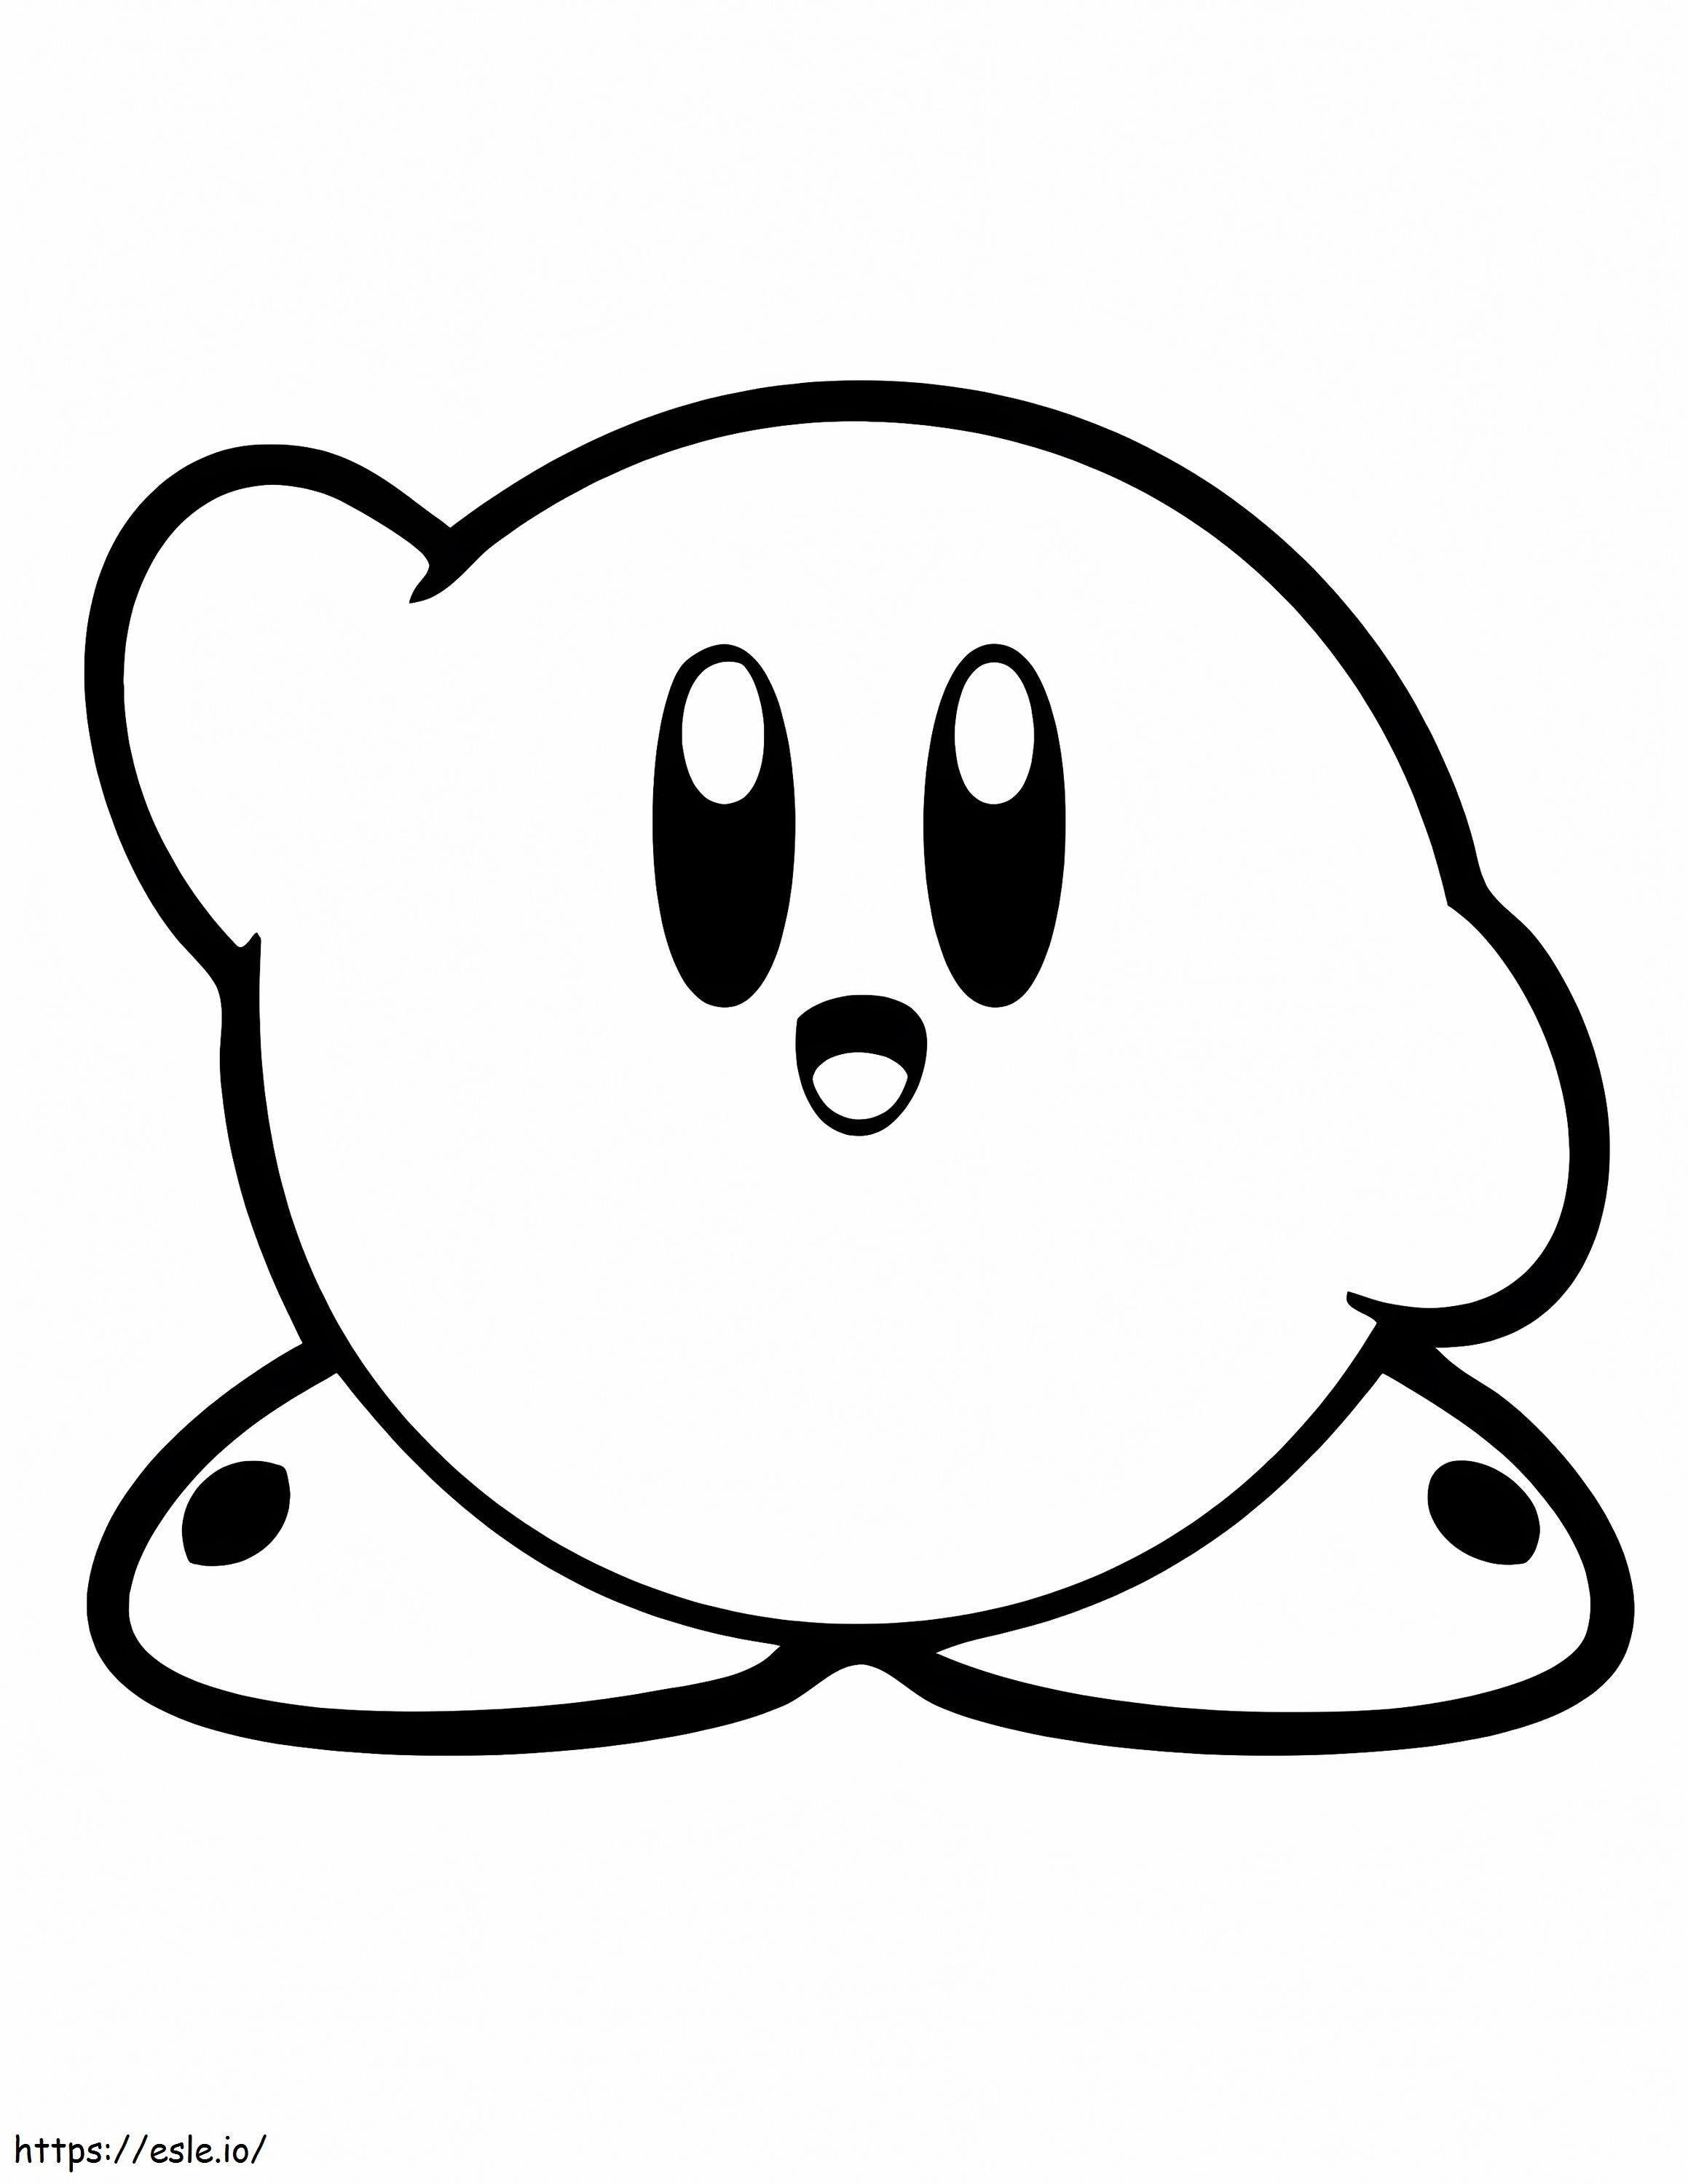 Kirby Says Hello coloring page